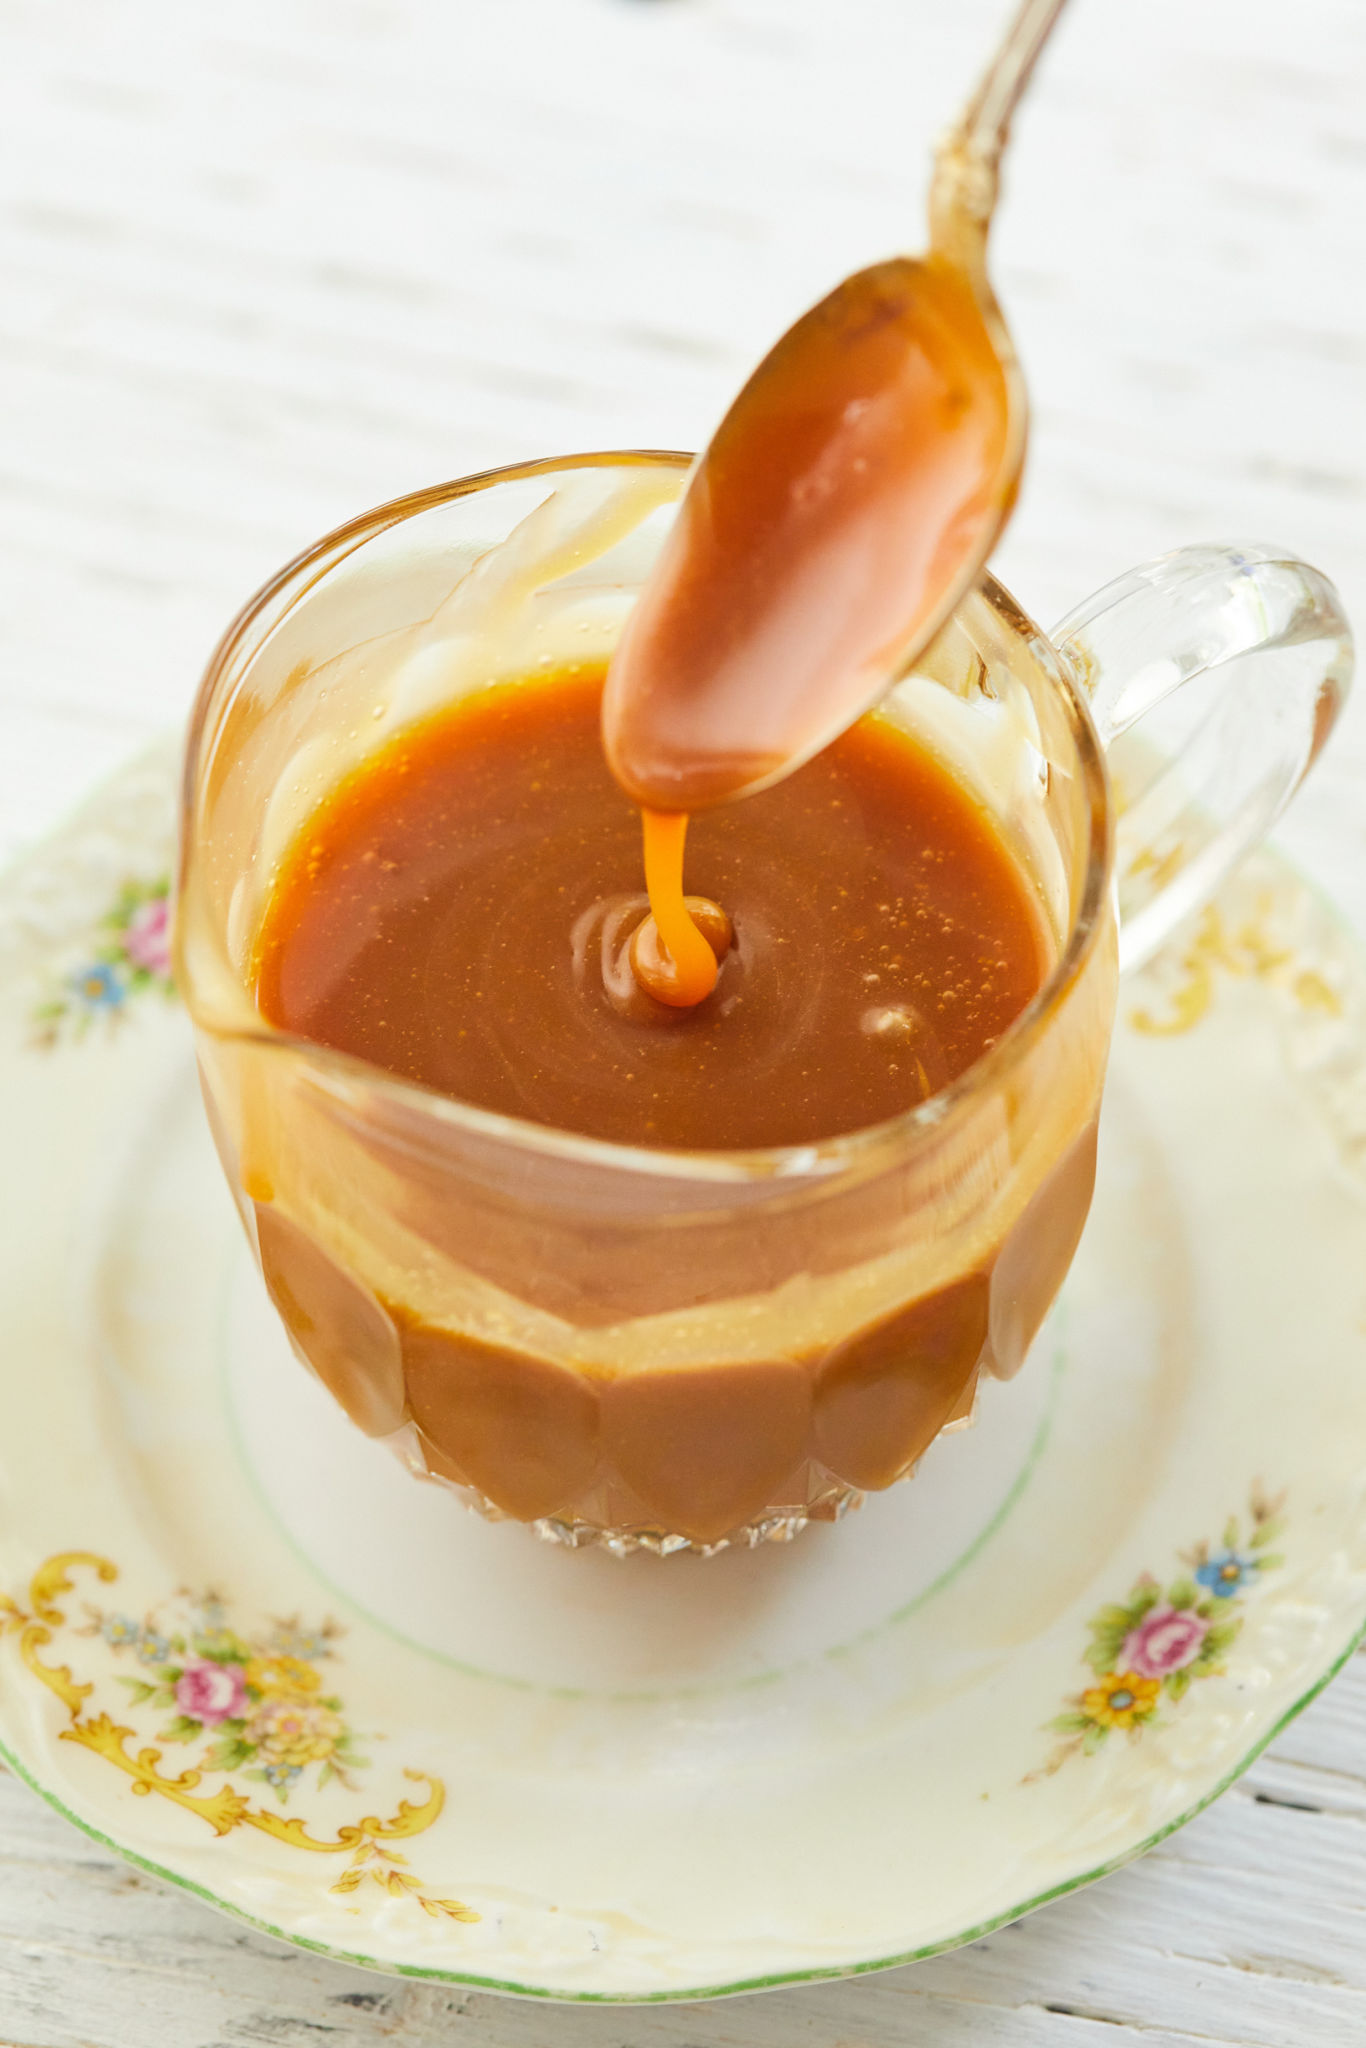 Spiced Rum Caramel Sauce running off a spoon into a glass.